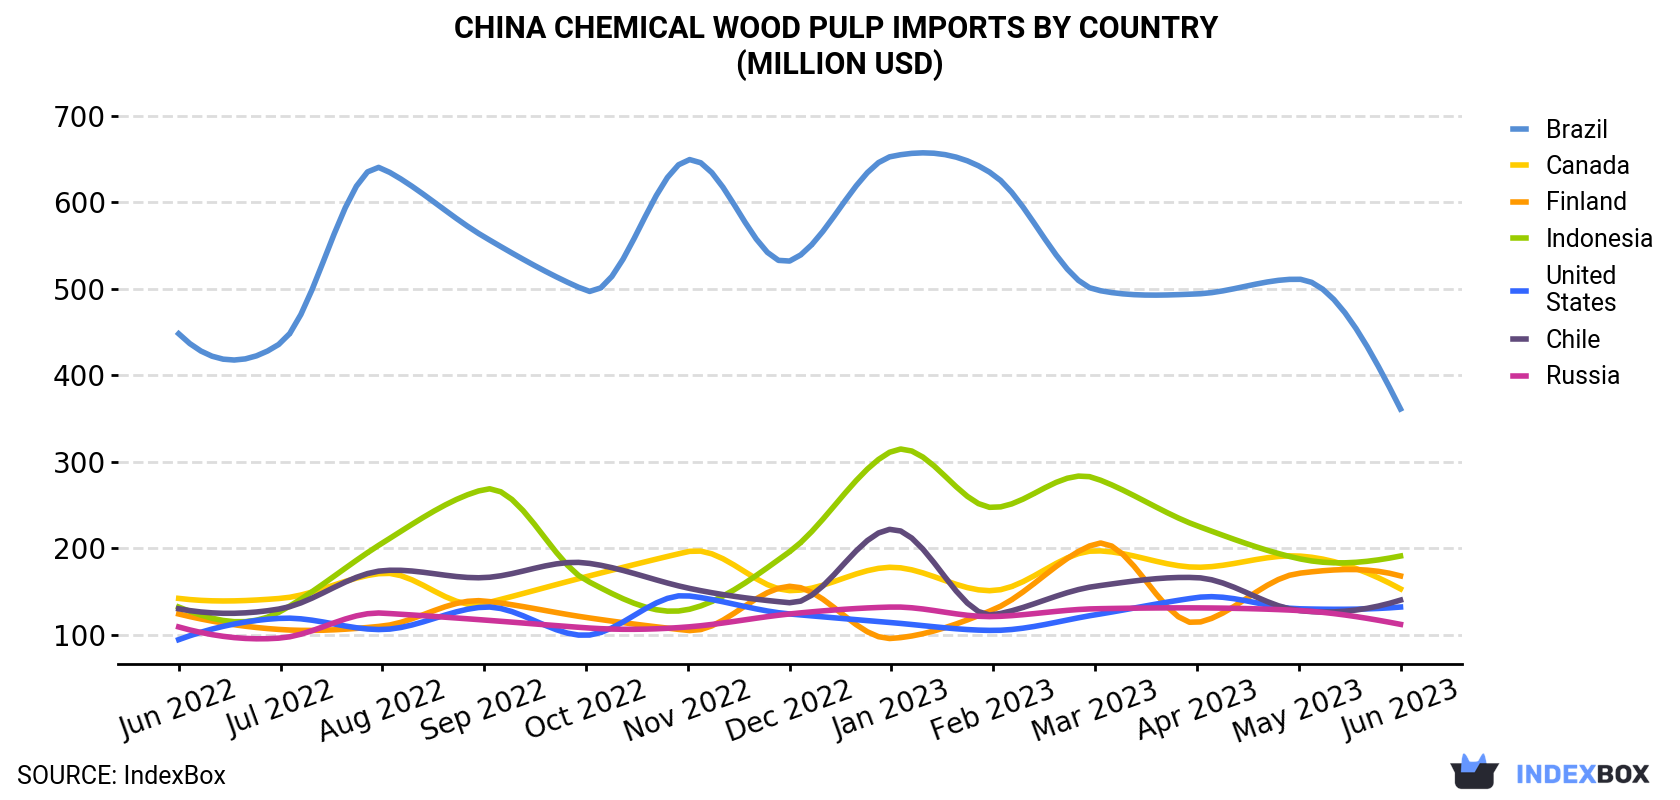 China Chemical Wood Pulp Imports By Country (Million USD)